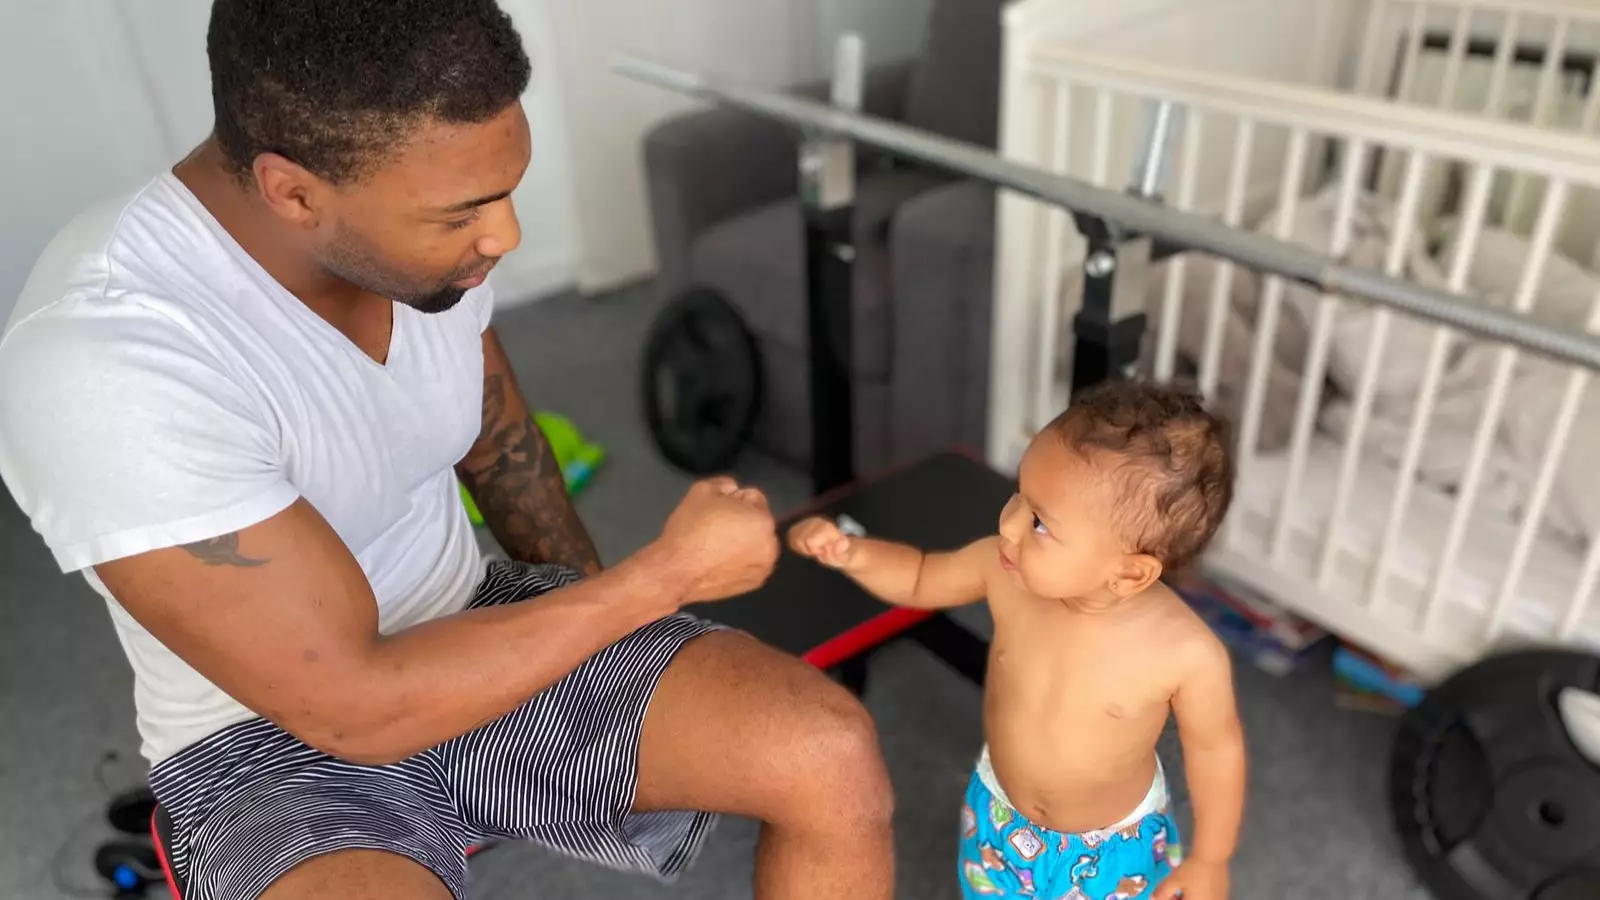 Personal Trainer Slammed For 'Dangerously' Performing Bench Presses Over Baby Son